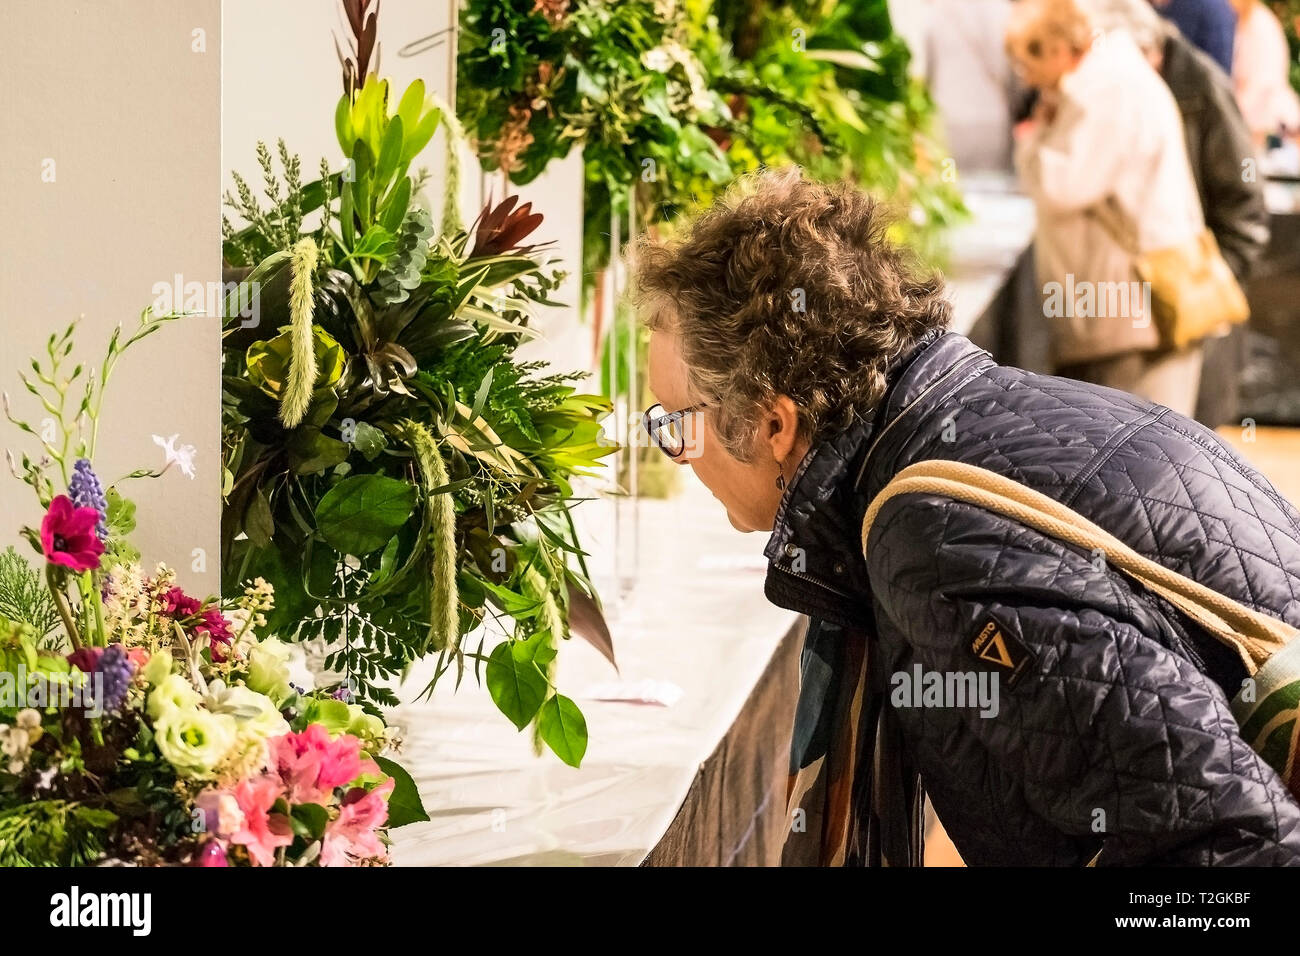 A gardening enthusiast looking closely at plants in a flower show. Stock Photo